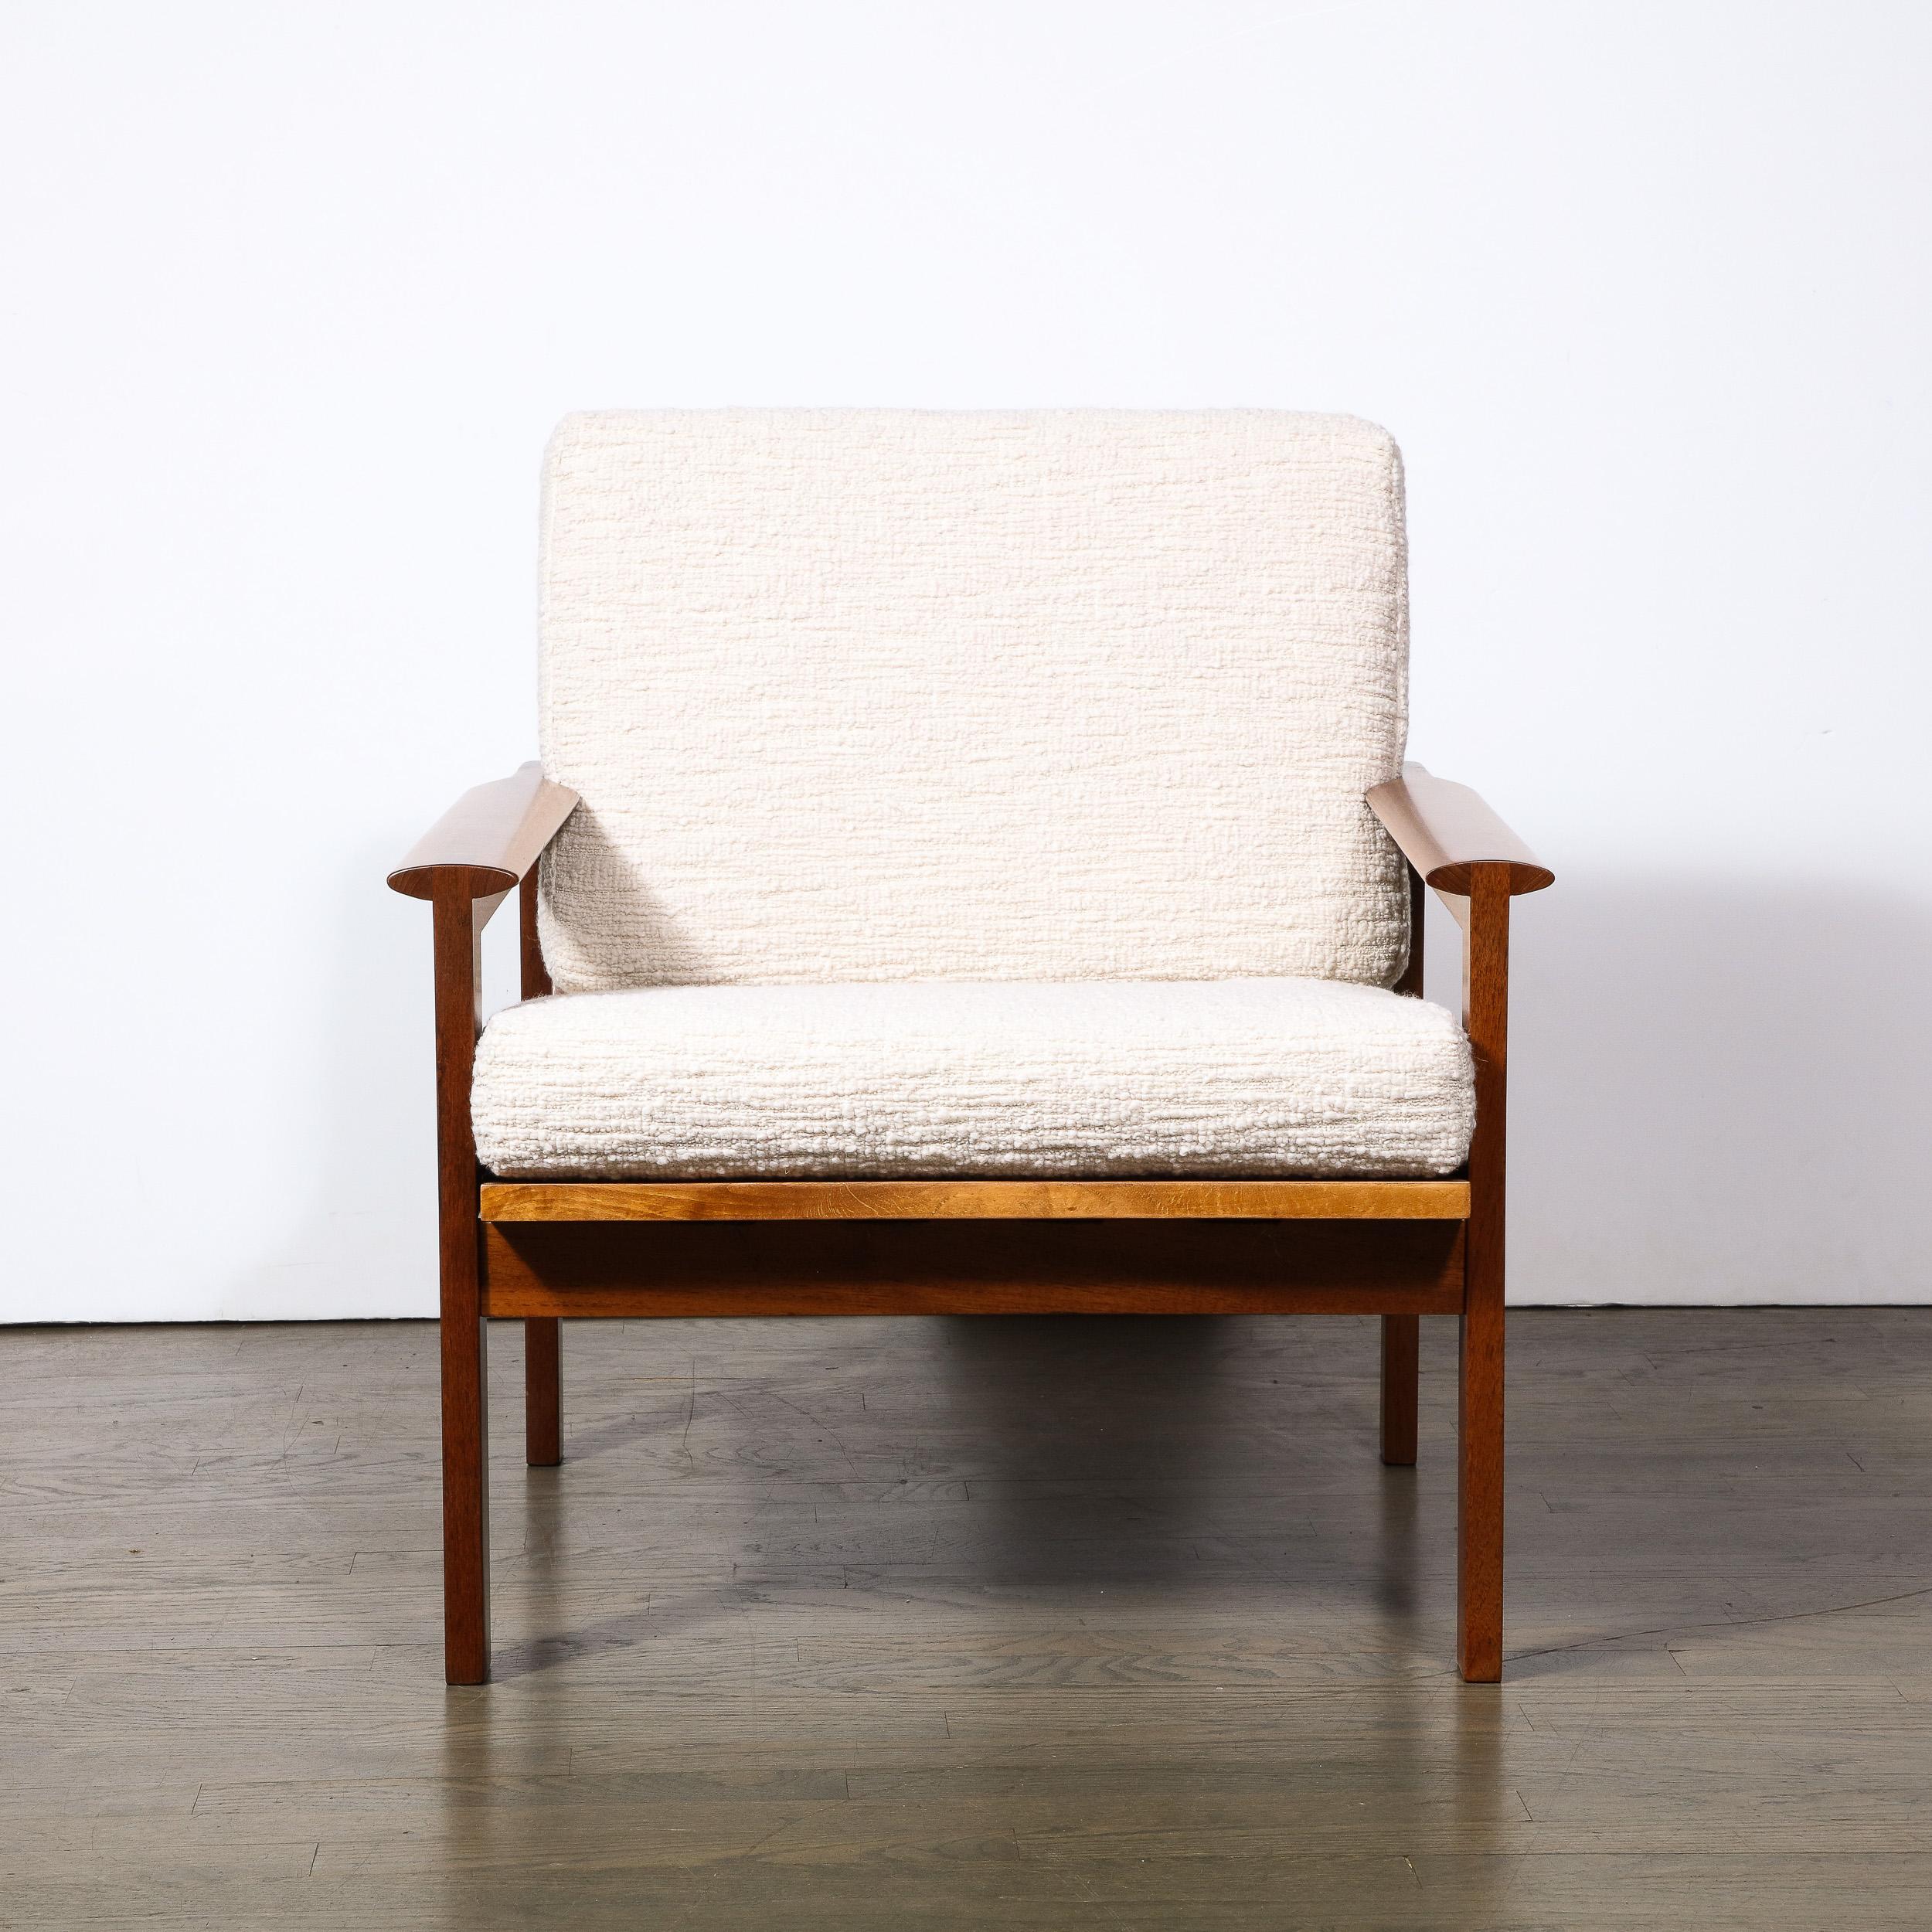 This refined Scandinavian Mid-Century Modern armchair was realized by the esteemed designer George Tanier in Denmark circa 1960. This piece is a study simplicity of first rate design, and how elemental forms can be combined to a powerful effect (as